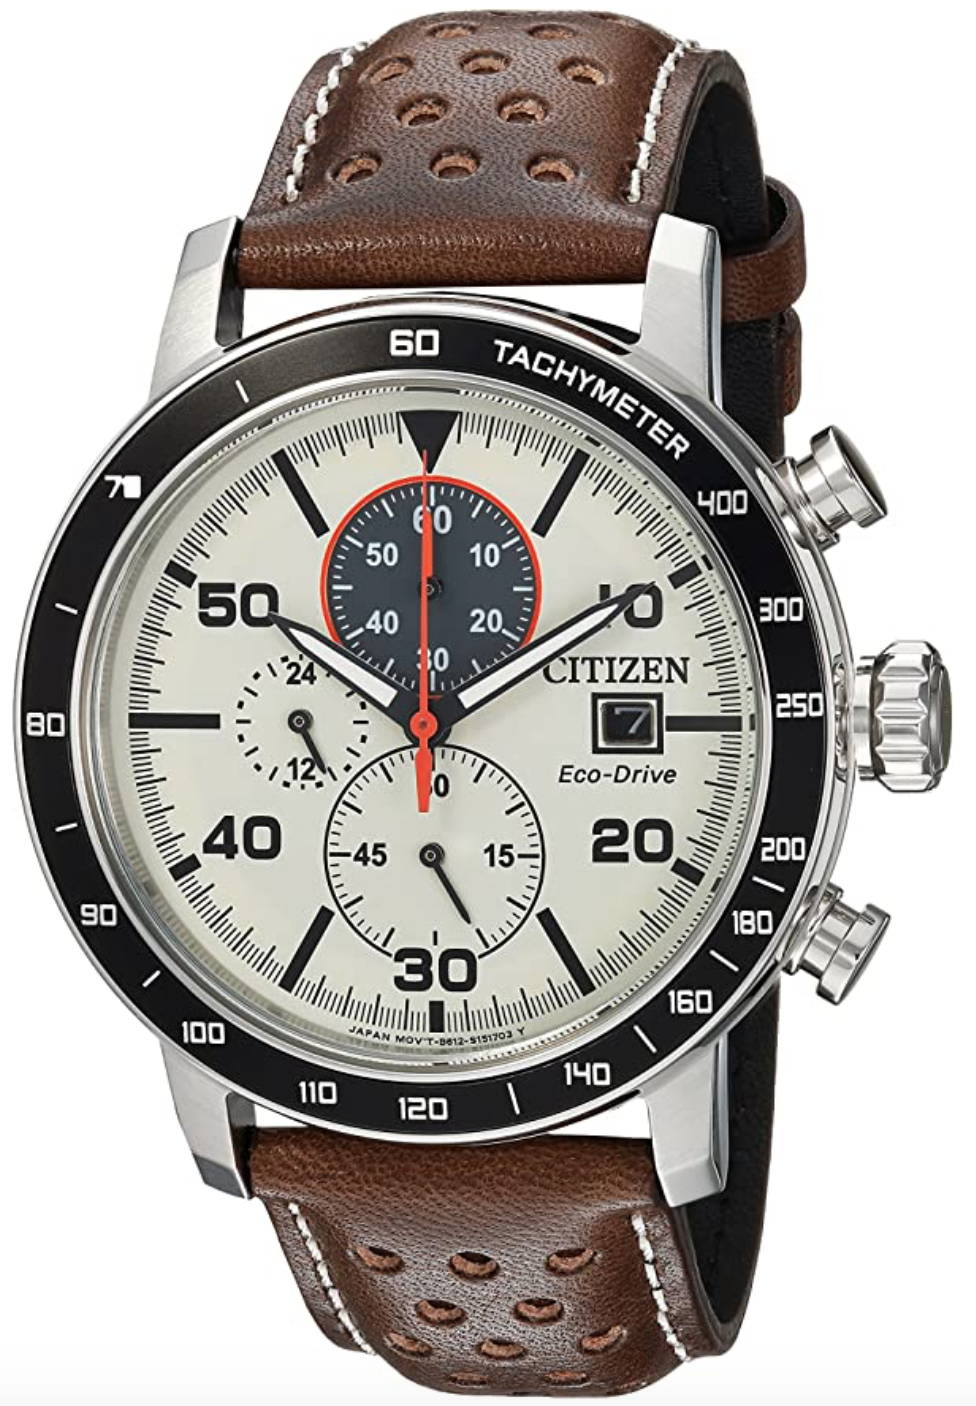 Citizen Men's 'Eco-Drive' Quartz Stainless Steel and Leather Casual Watch, Color:Brown (Model: CA0649-06X)